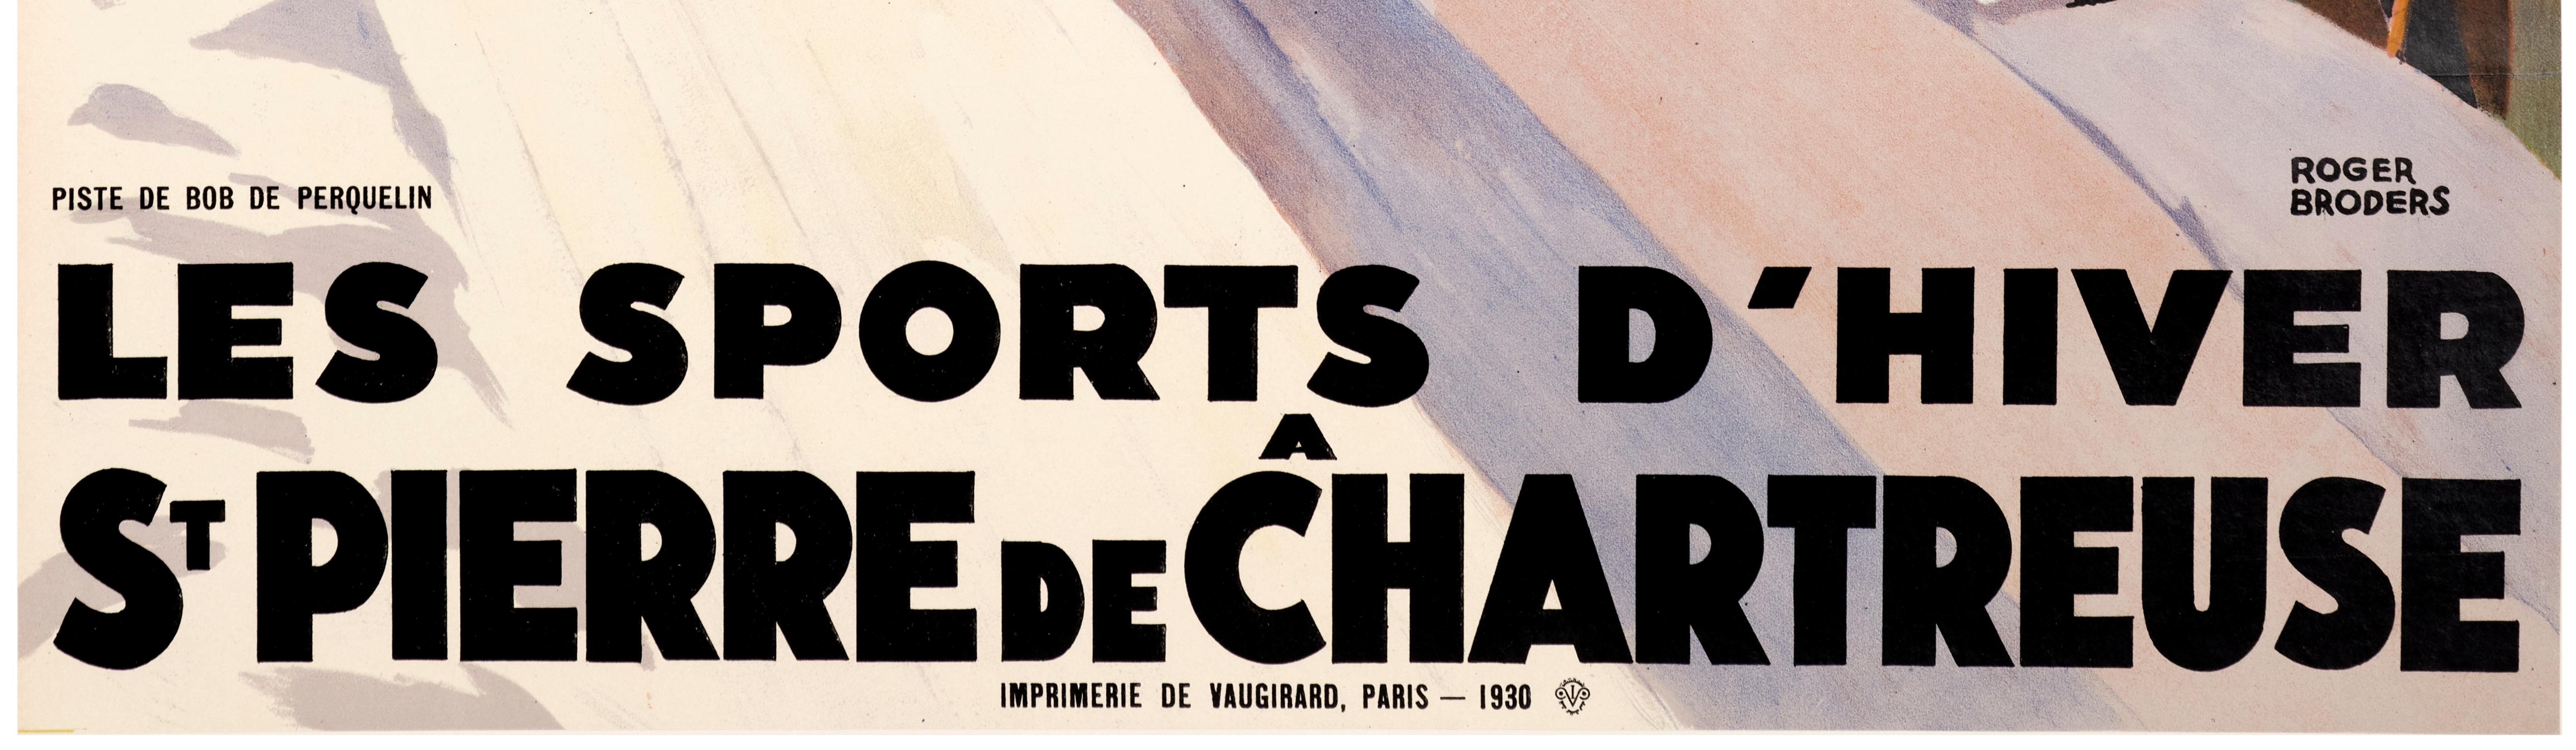 P.L.M. poster created by Roger Broders in 1930 to promote winter sports in St Pierre de Chartreuse in the Alps.

Artist: Roger Broders (1883-1953)
Title: Les Sports d’Hiver à St Pierre de Chartreuse 
Date: 1930
Size: 24.8 x 39.8 in / 63 x 101